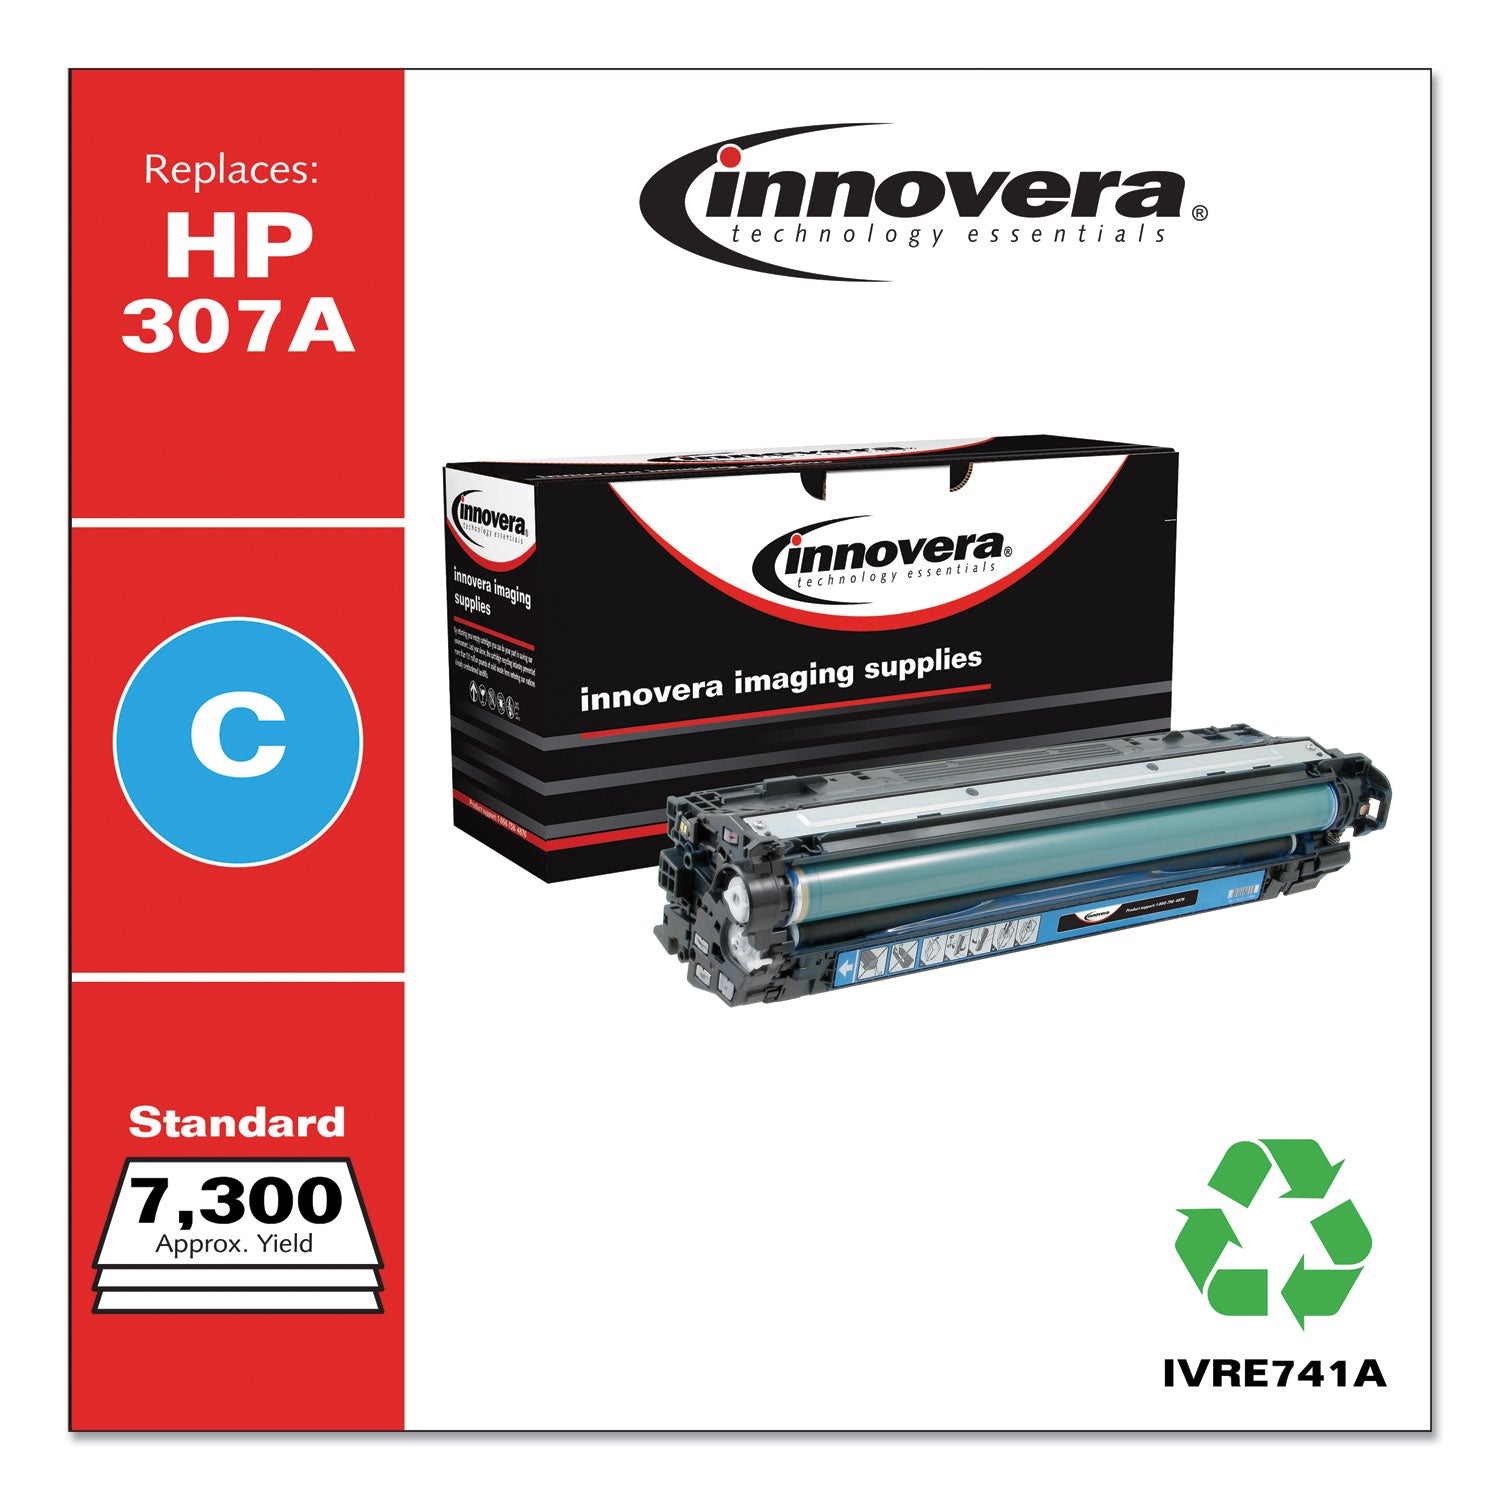 Remanufactured Cyan Toner, Replacement for 307A (CE741A), 7,300 Page-Yield, Ships in 1-3 Business Days - 